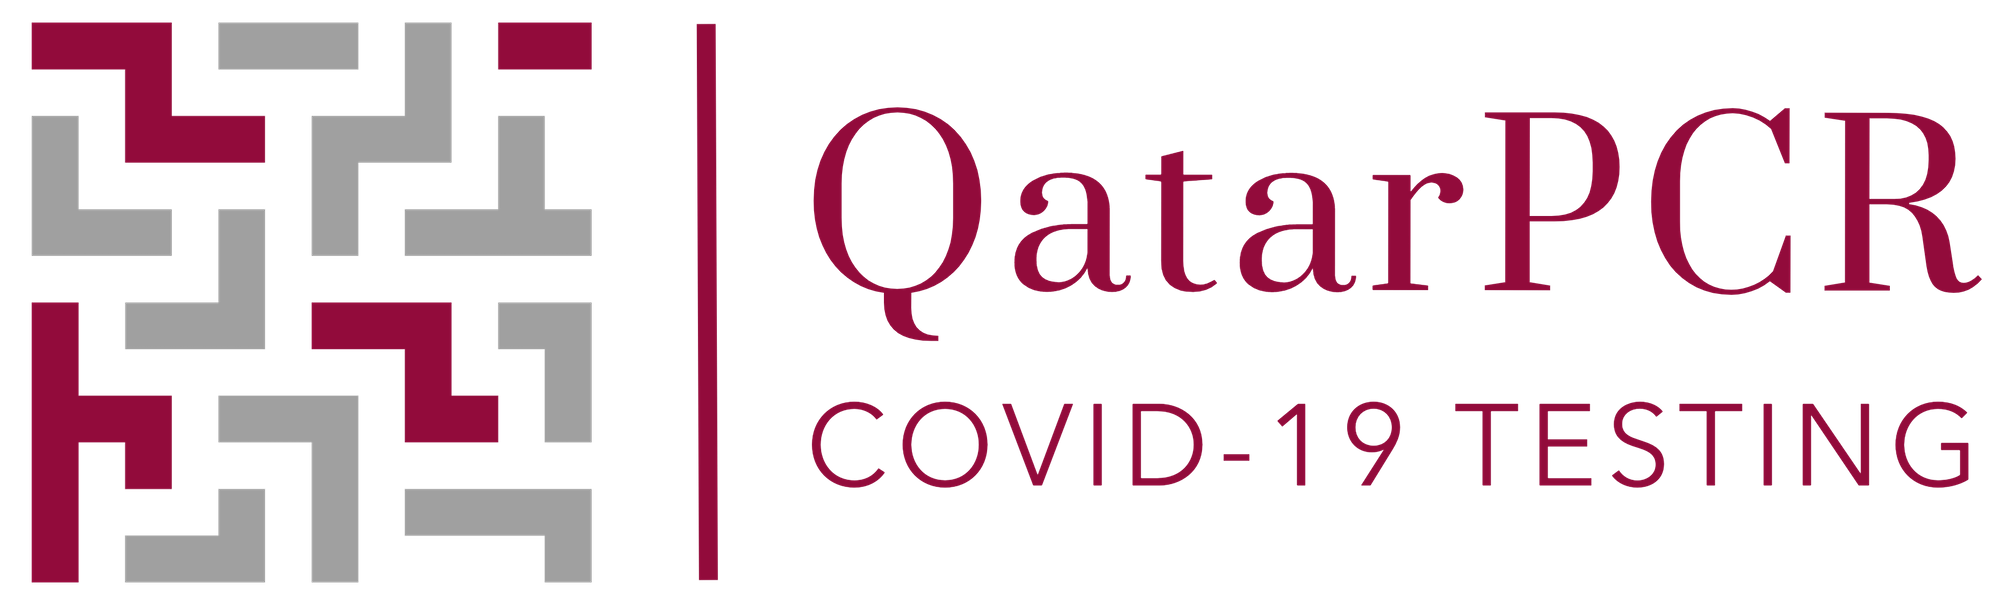 Qatar PCR Booking Portal for home and hotel visits world cup